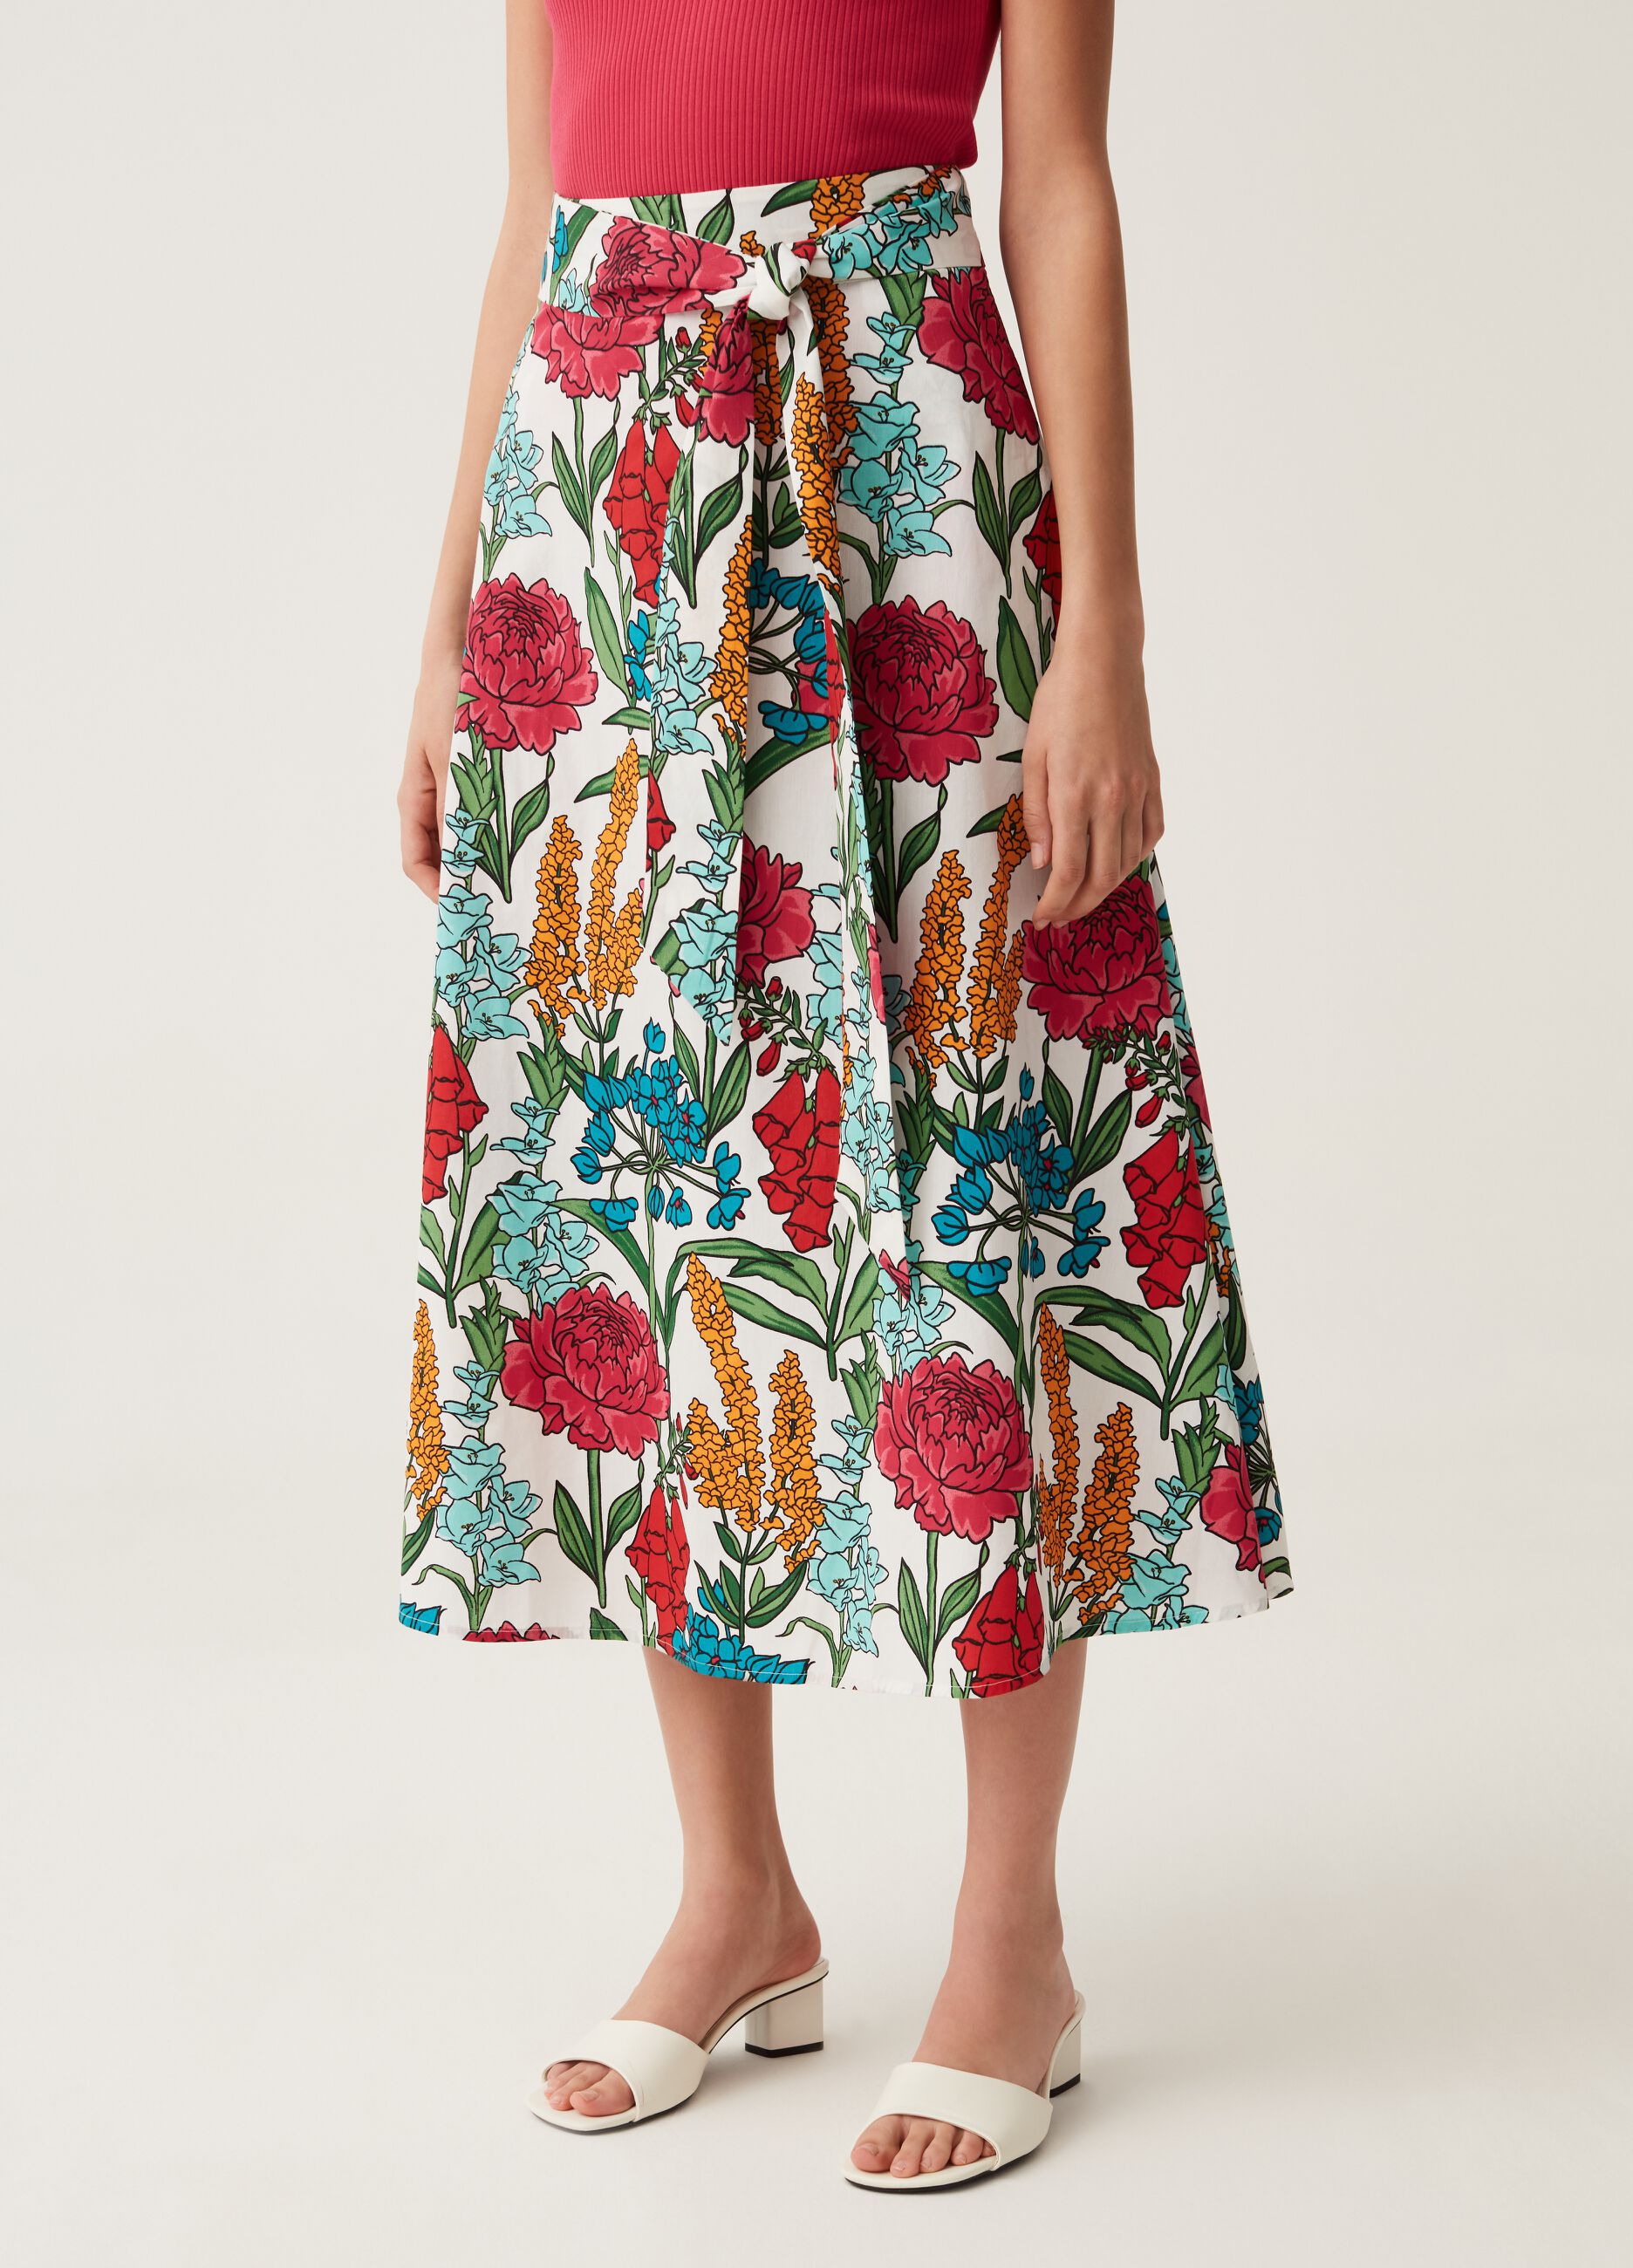 Midi skirt with floral print